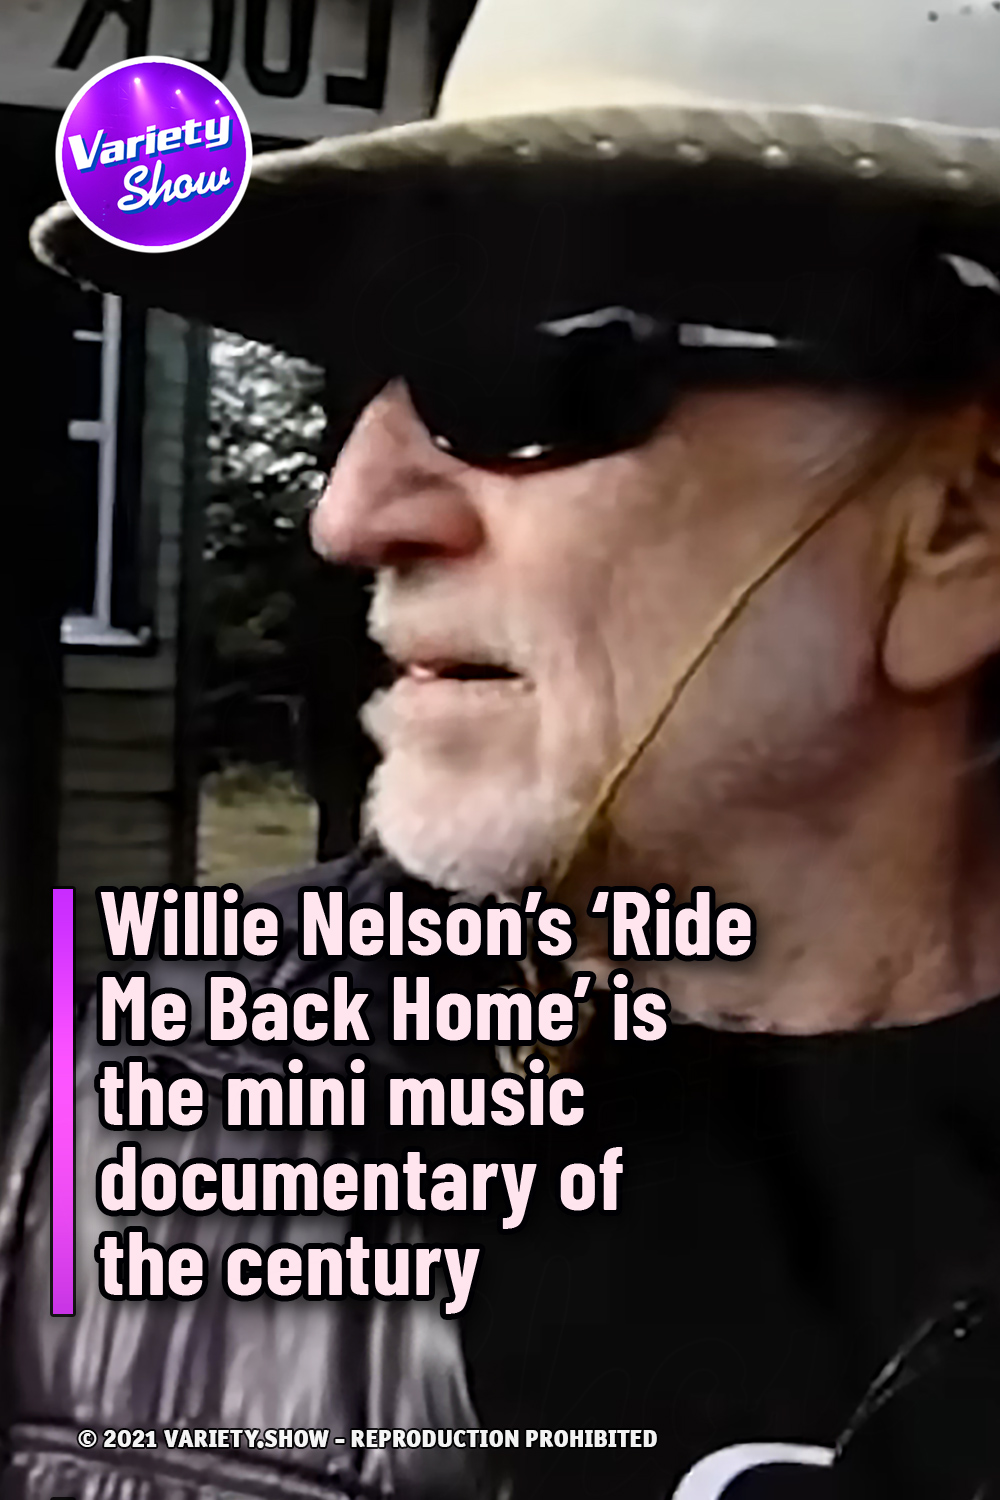 Willie Nelson’s ‘Ride Me Back Home’ is the mini music documentary of the century